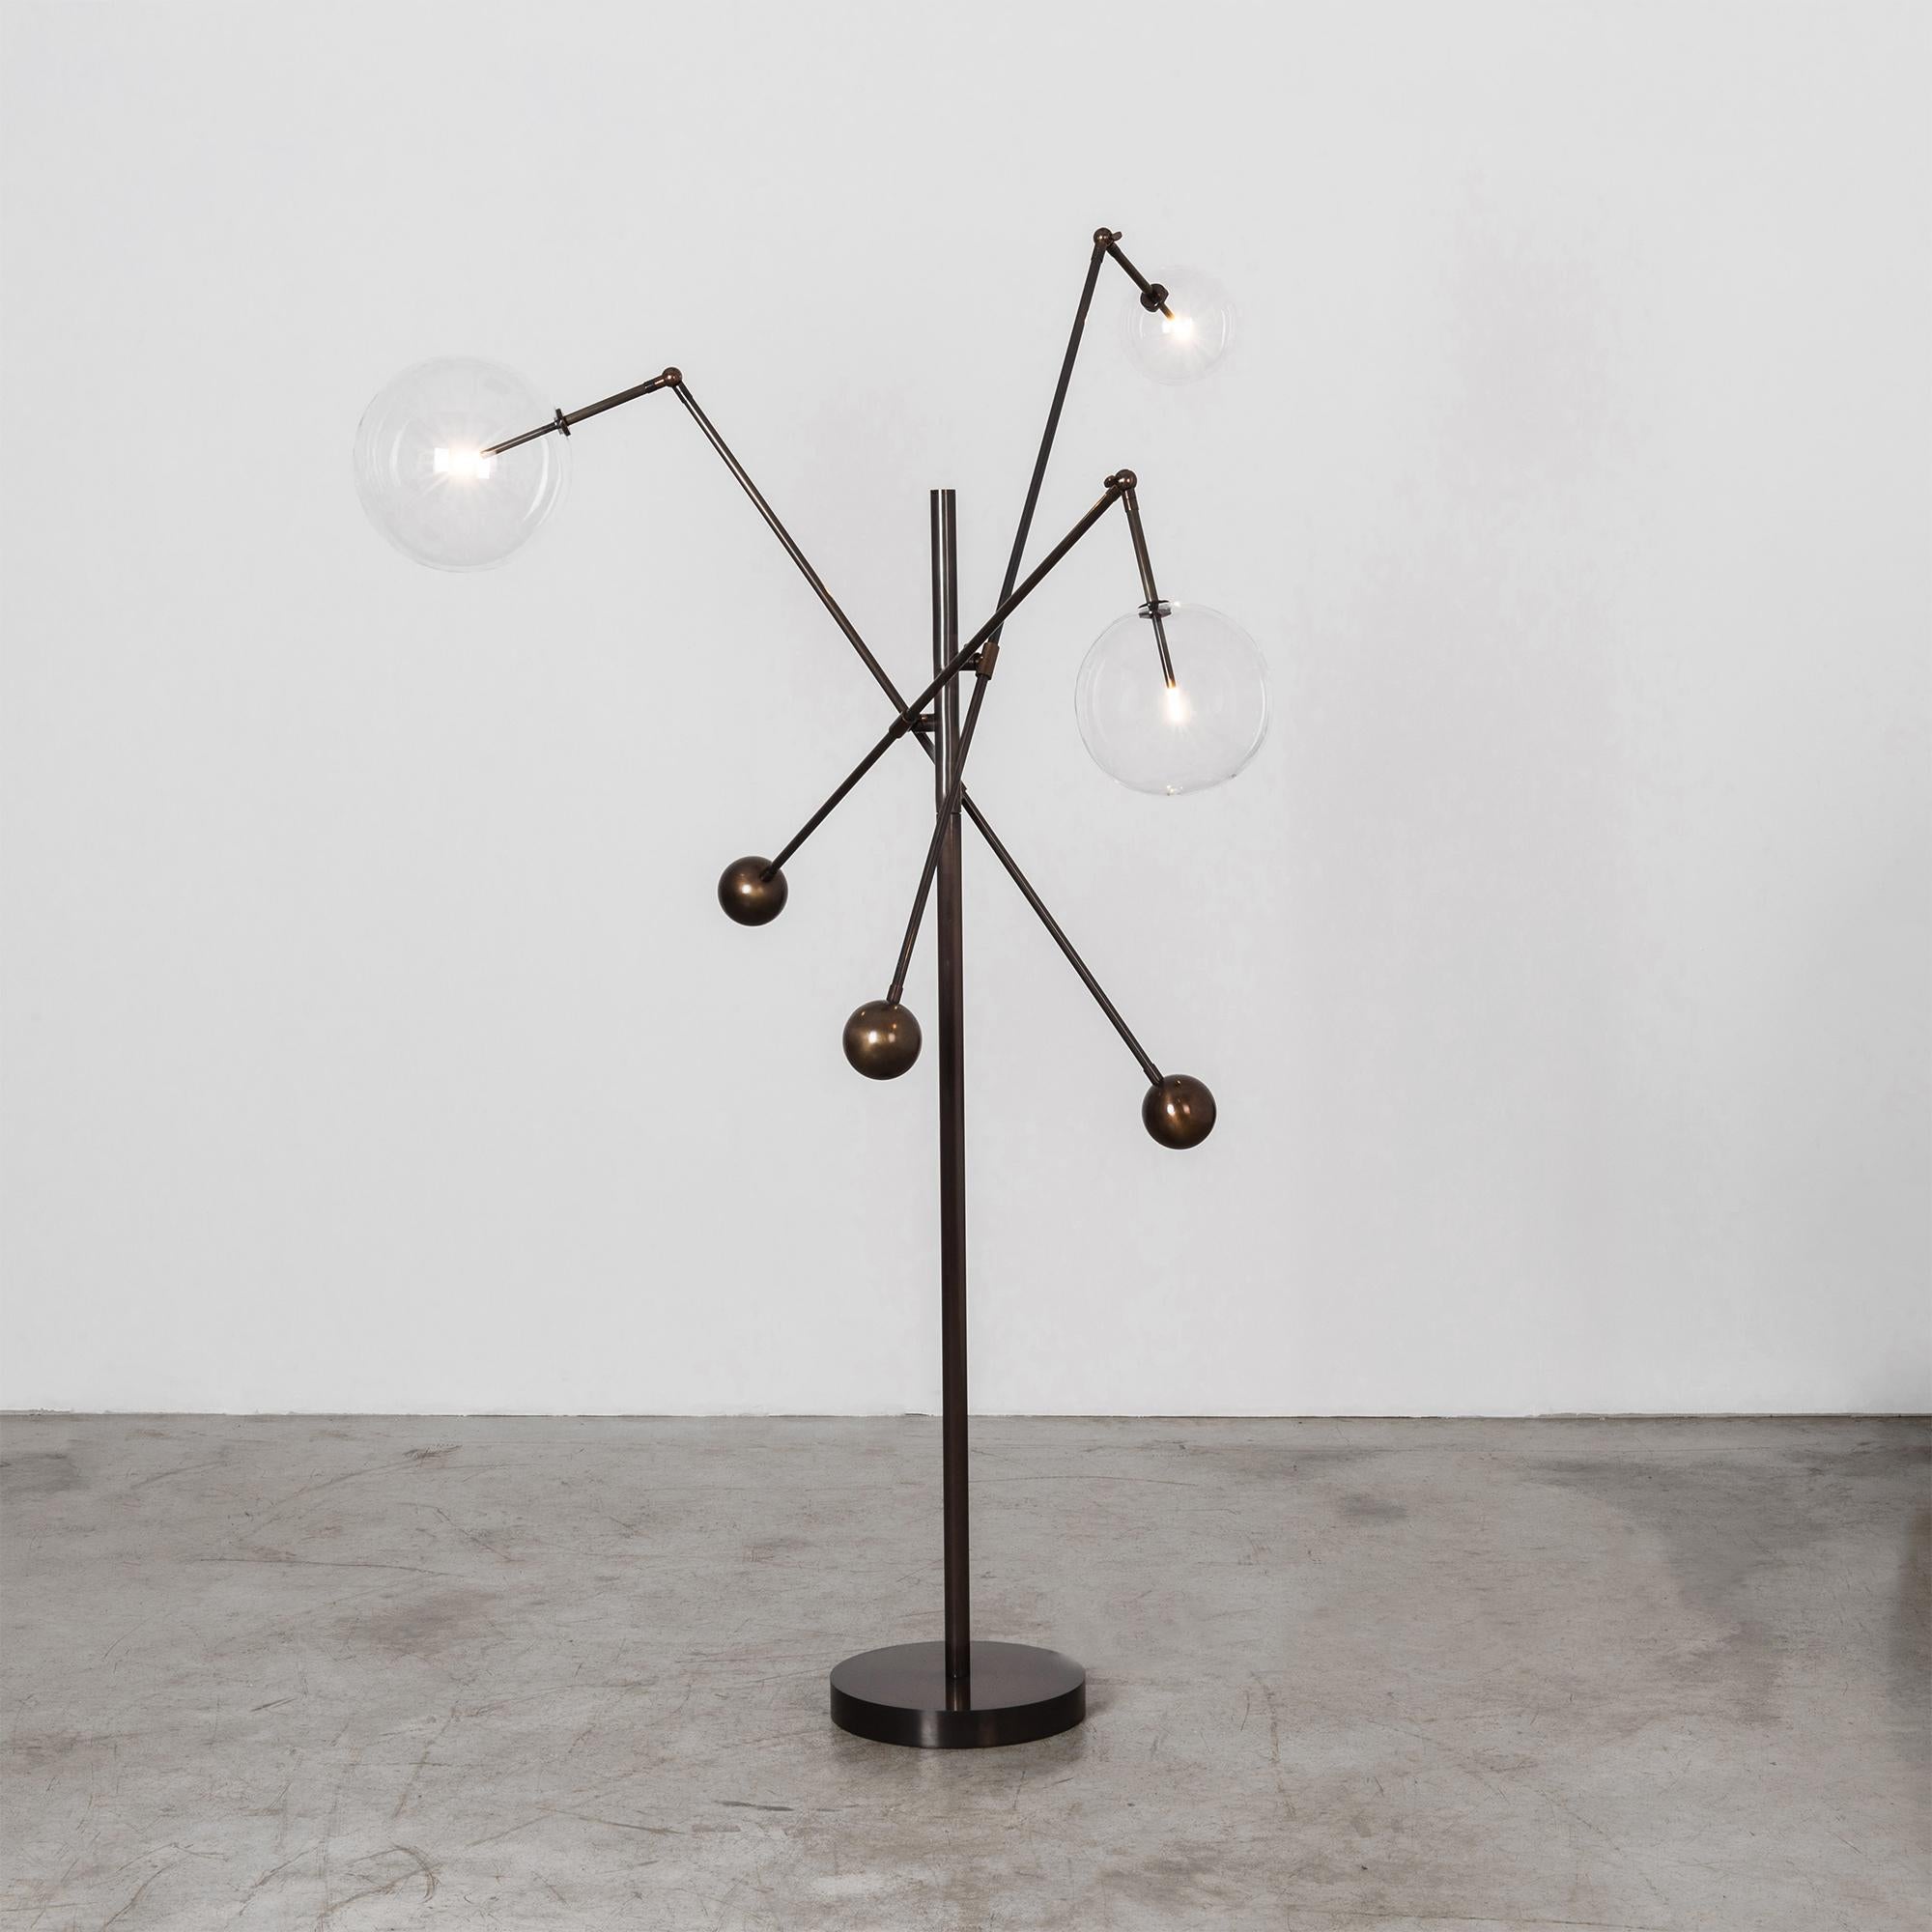 Black Gunmetal 3 arm floor lamp by Schwung
Dimensions: D 124.1 x W 129.3 x H 182.6 cm
Materials: Solid brass, hand-blown glass globes
Finish: Black Gunmetal. 
Available in finishes: Natural Brass or Polished Nickel. Also available in table lamp.